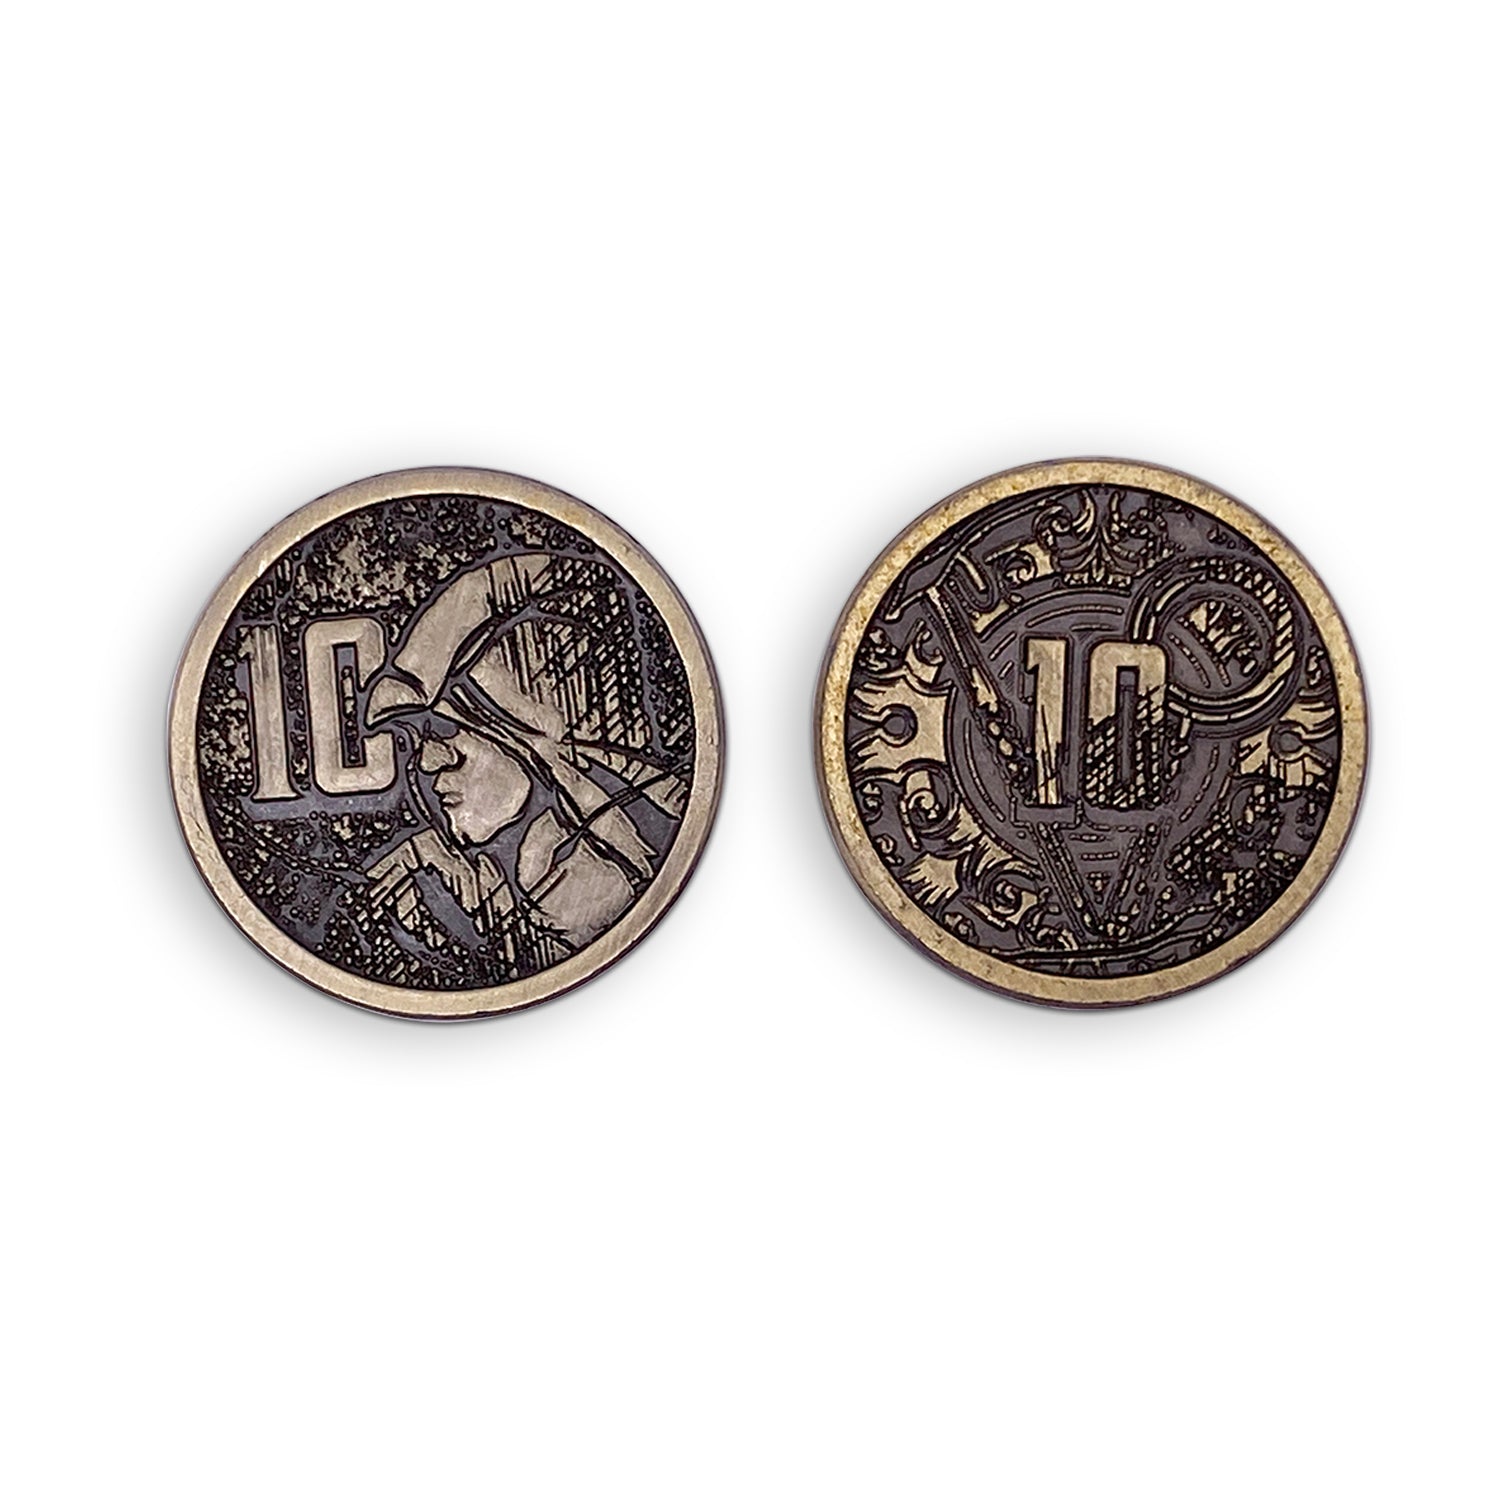 Adventure Coins – Thieves Metal Coins Set of 10